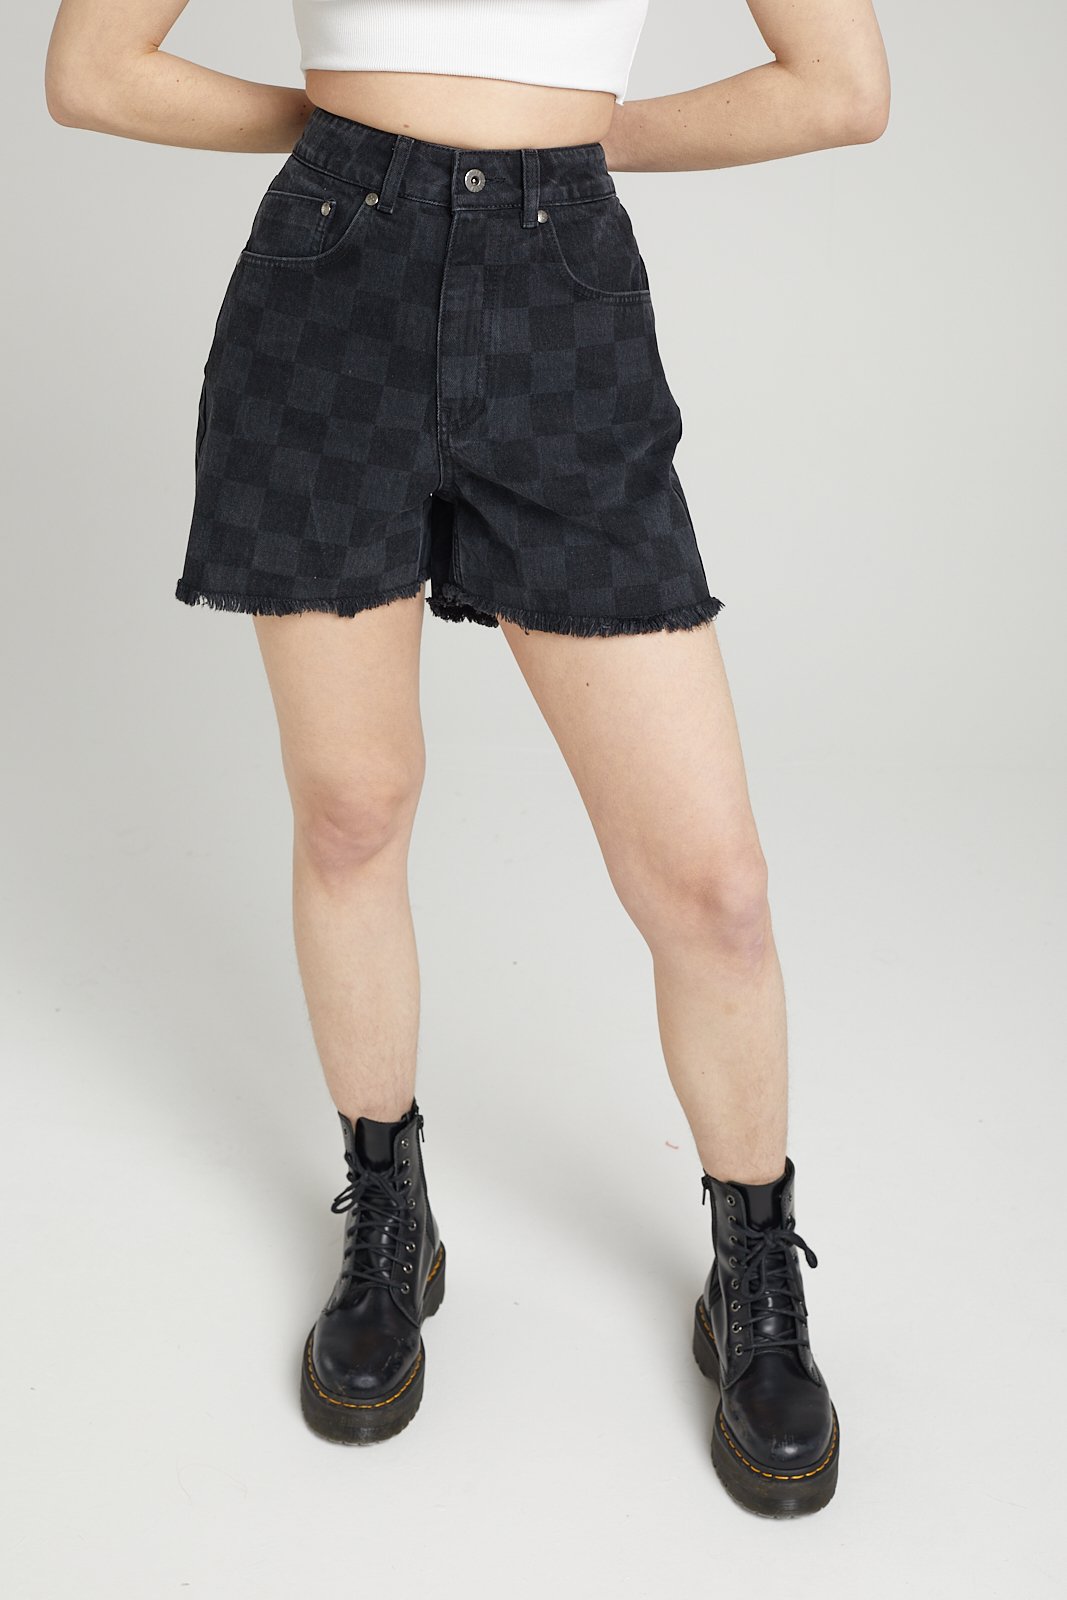 RAVE DENIM SHORTS - CHARCOAL - EXCLUSIVE Denim from THE RAGGED PRIEST - Just $48.95! SHOP NOW AT IAMINHATELOVE BOTH IN STORE FOR CYPRUS AND ONLINE WORLDWIDE